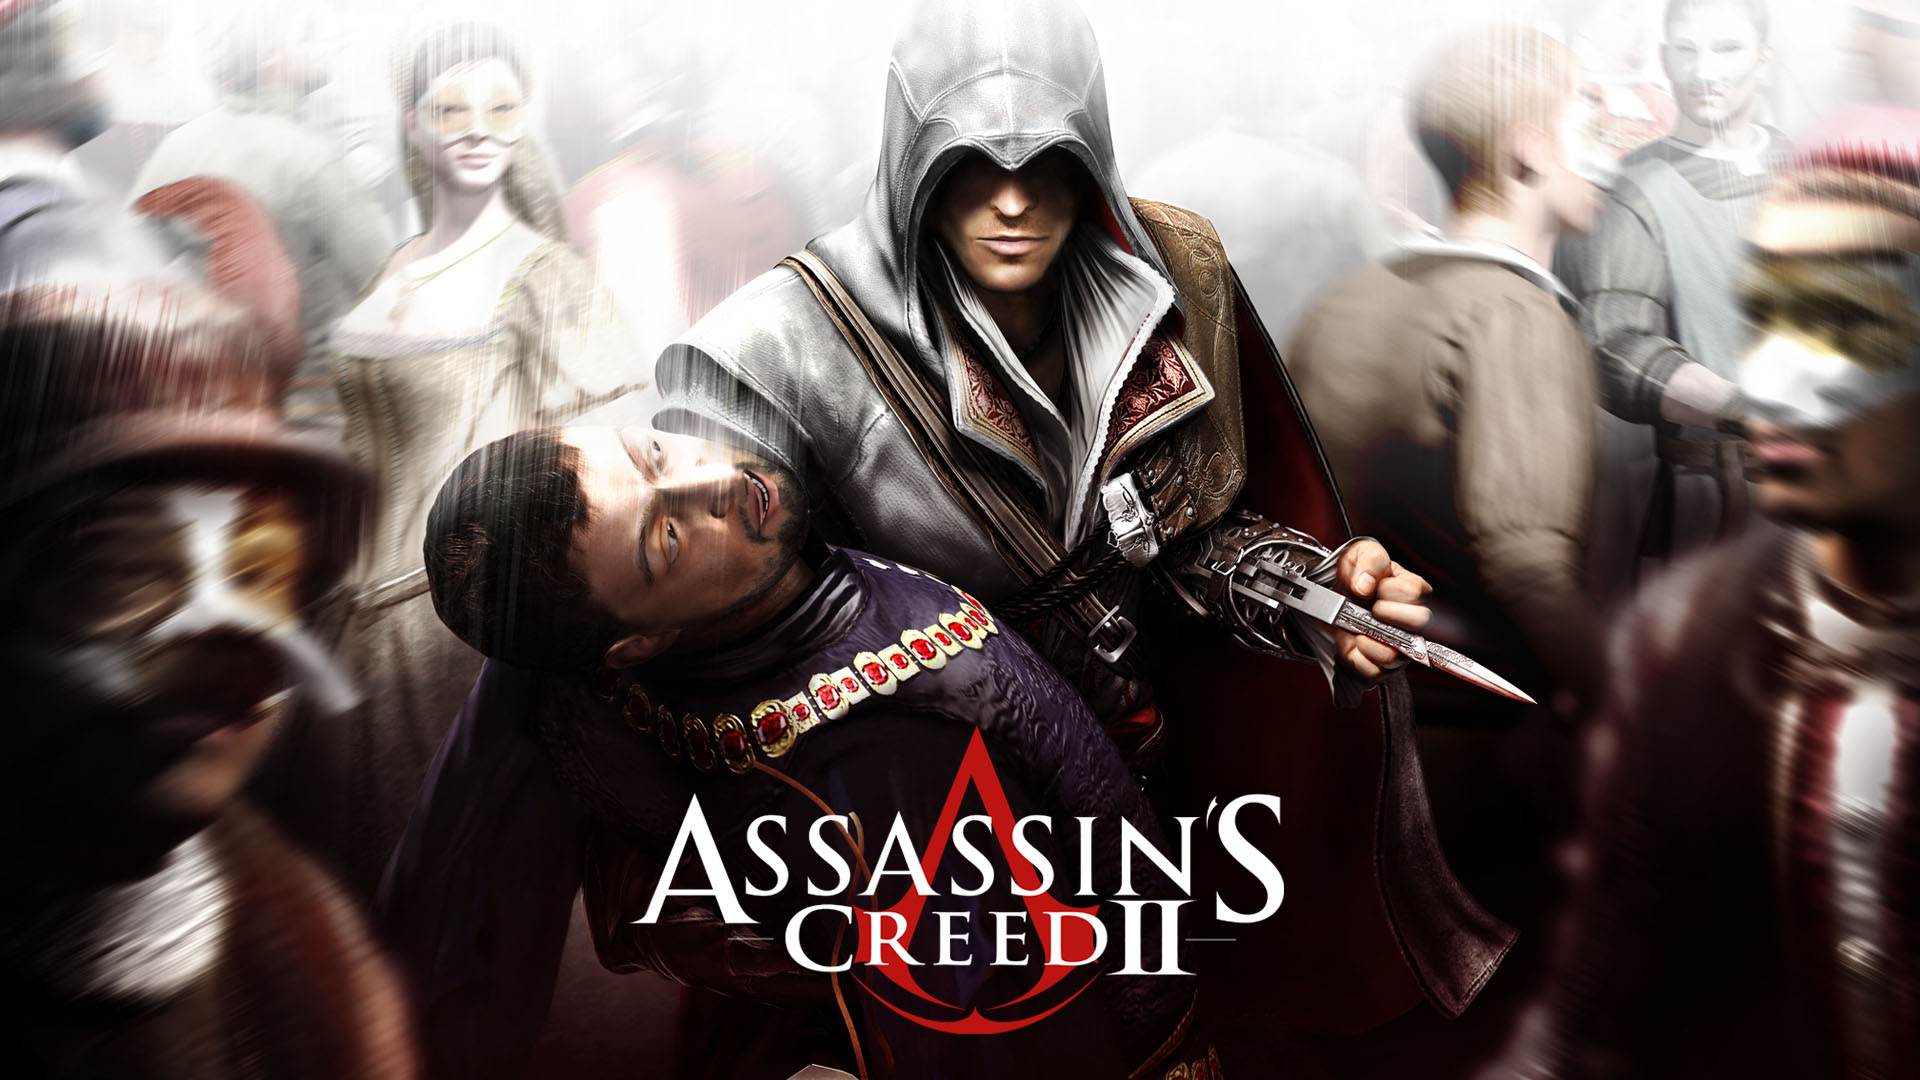 Assassins Creed 2 Free Download For PC